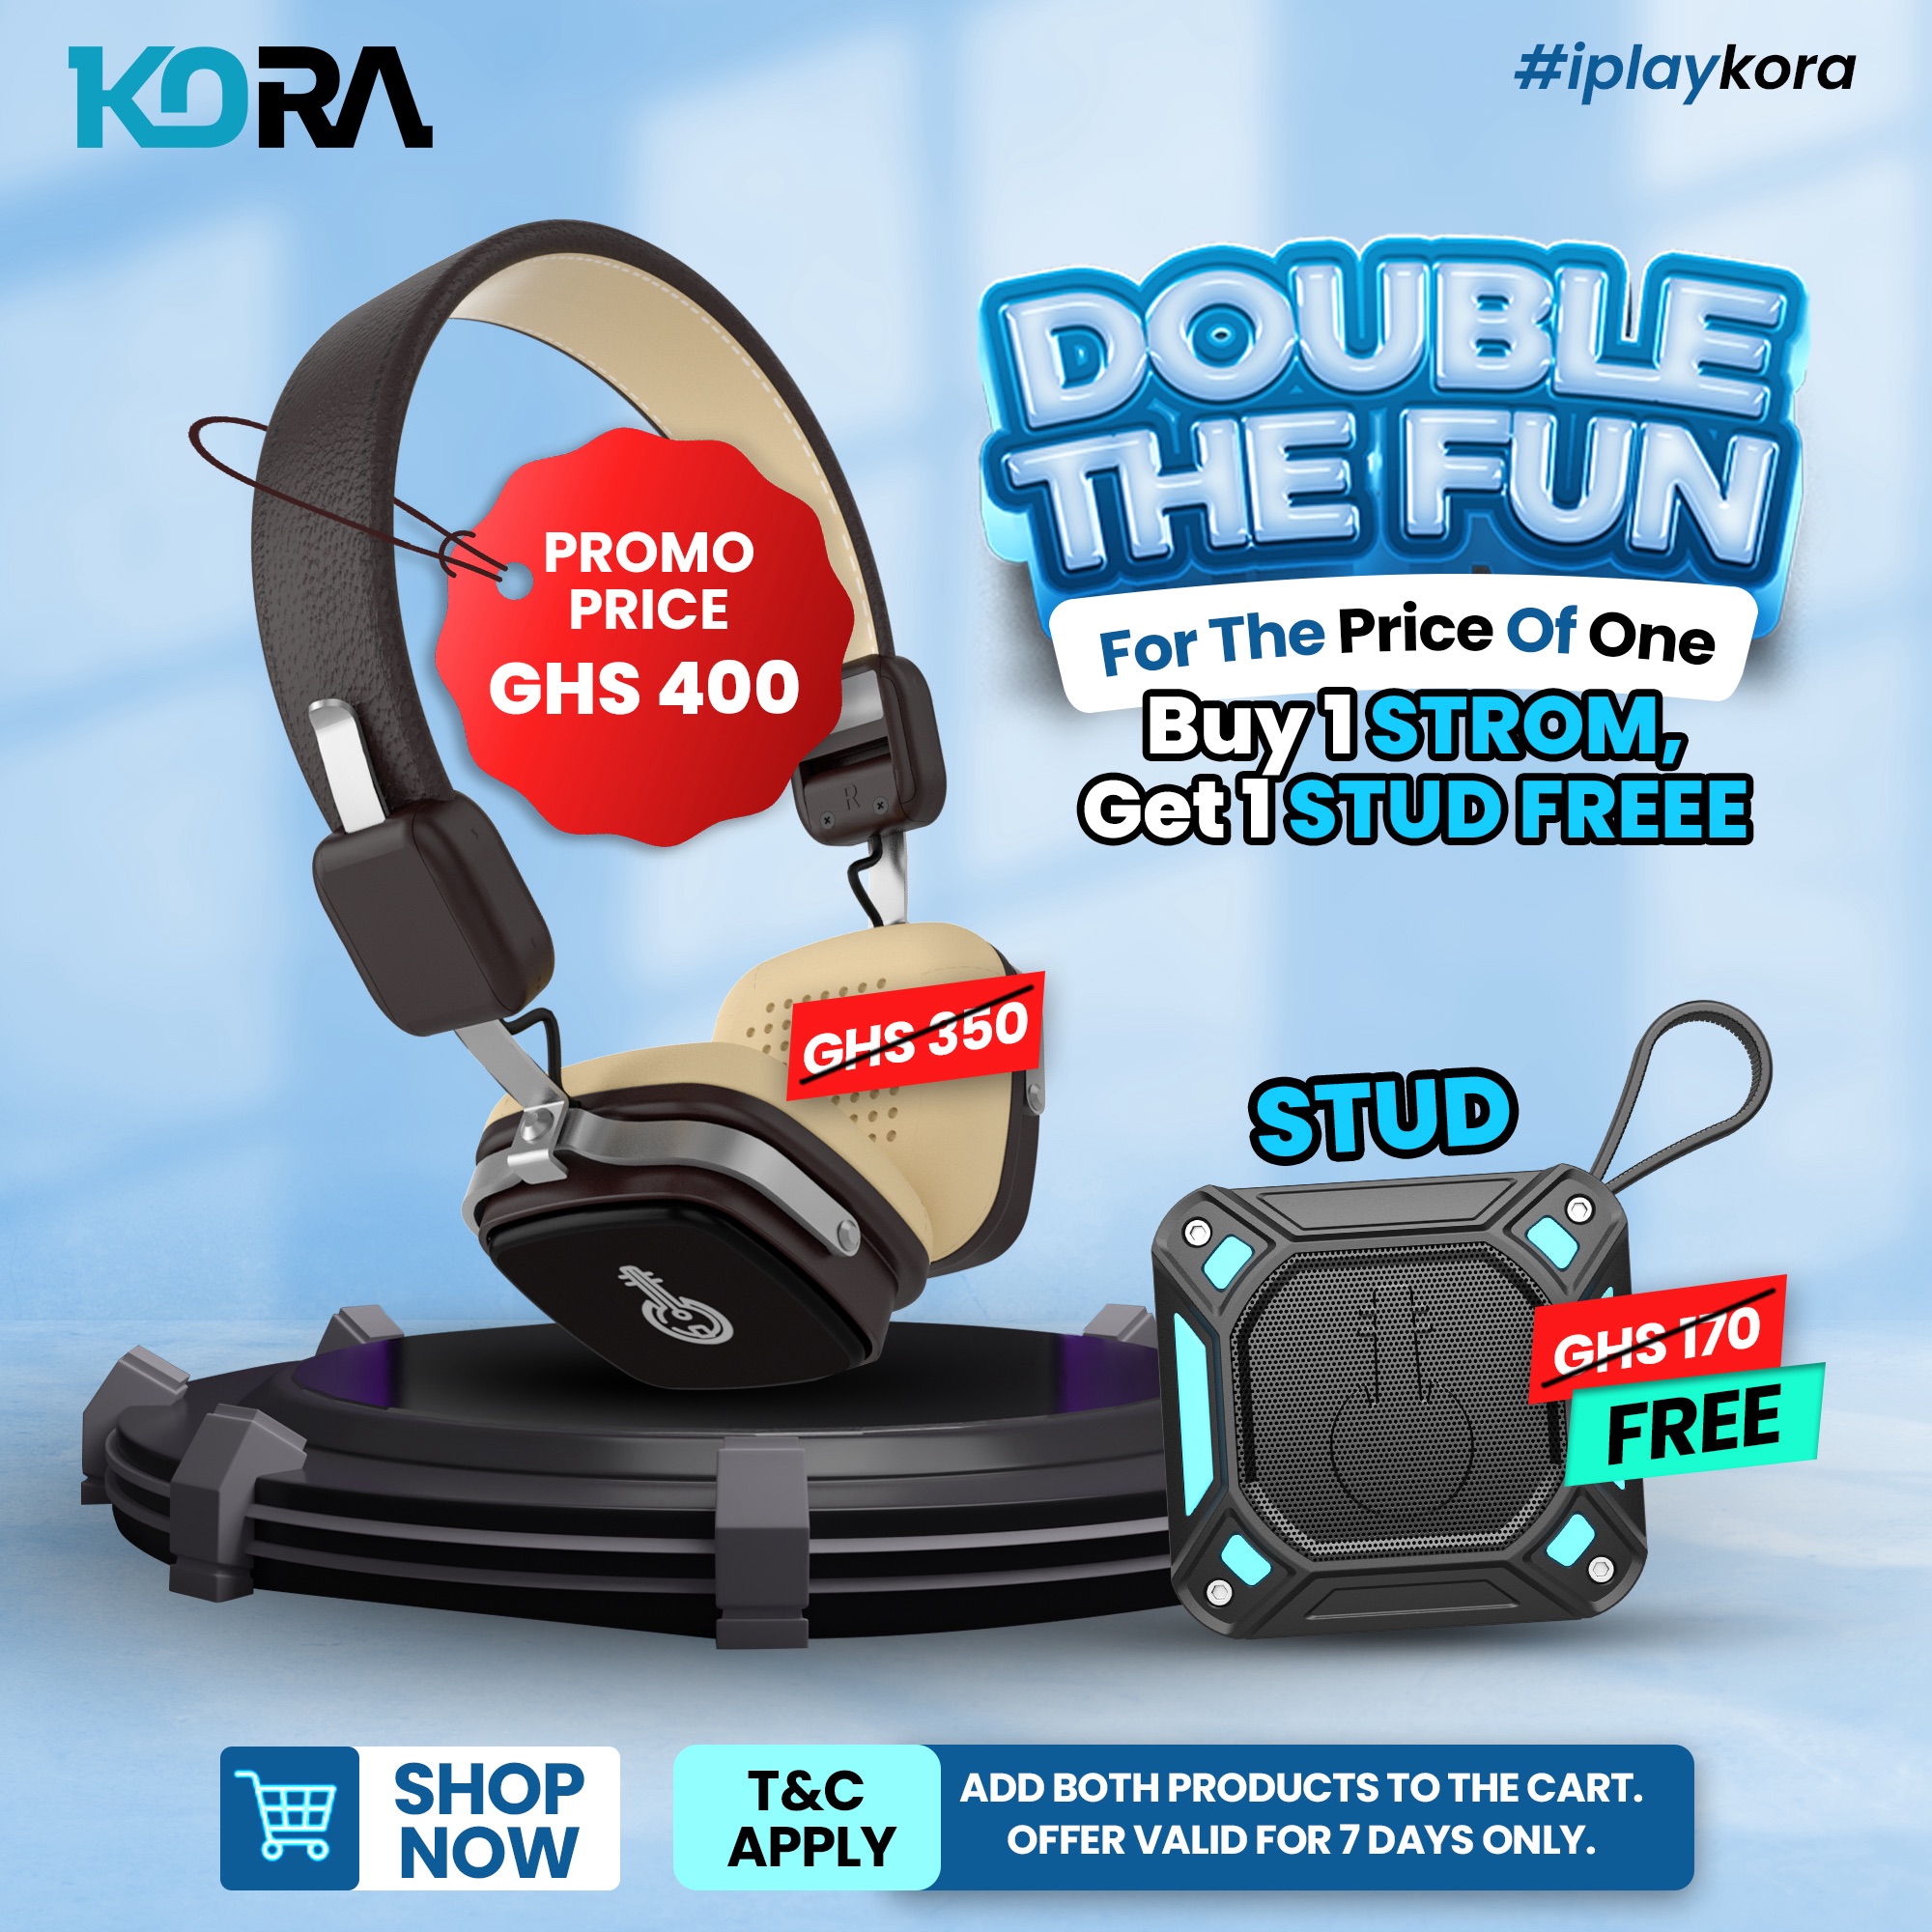 Kora Launches Explosive 7-Day Promotion: Buy 1 Strom, Get 1 Stud Free